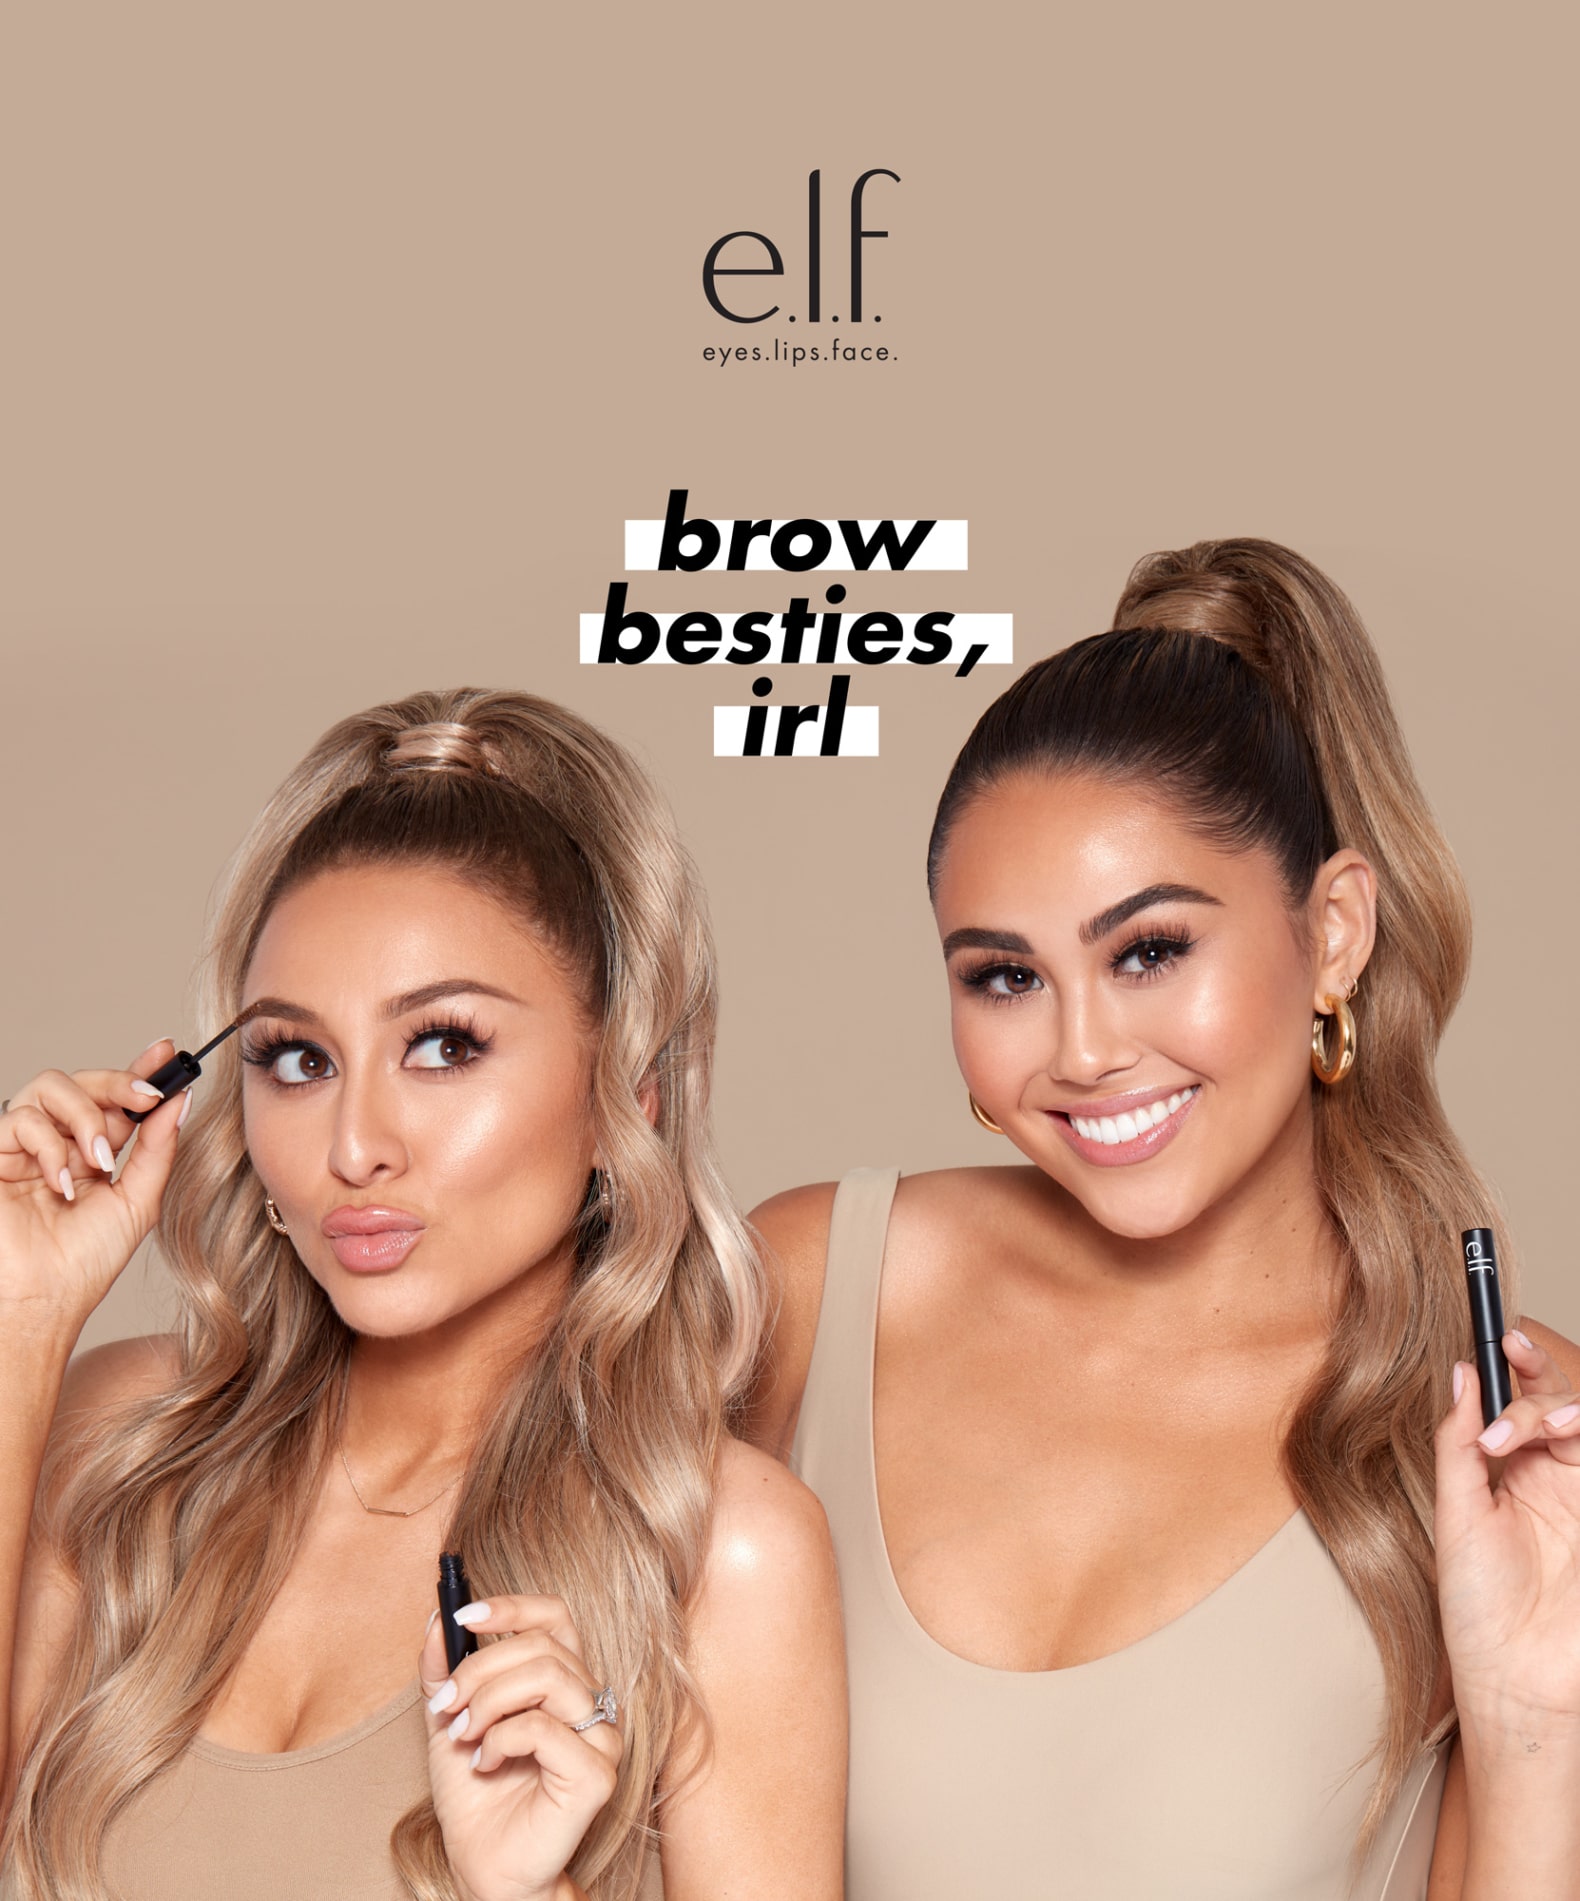 Two smiling people wearing makeup with long ponytails and matching tan tank tops holding eyebrow makeup products from e.l.f. The e.l.f. logo appears in the left corner and the words "brow besties, irl" are in the center on a white background.